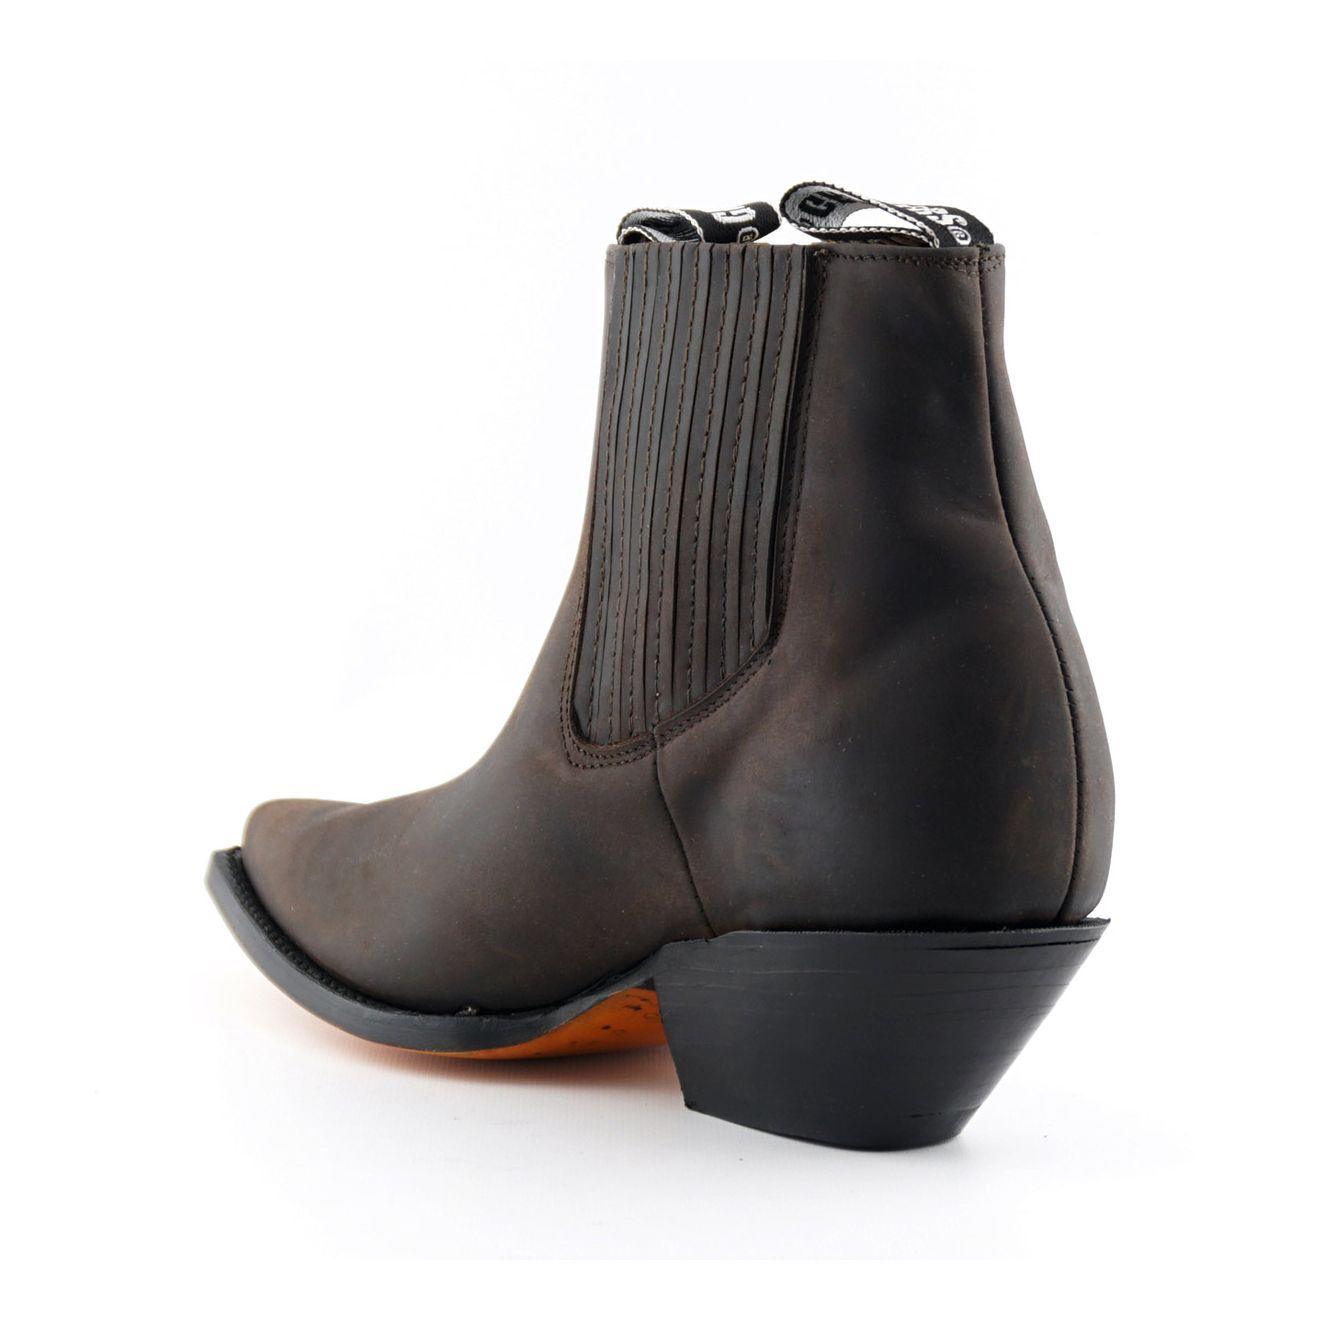 Grinders Unisex Brown Western Chelsea Boots- Mustang - Upperclass Fashions 